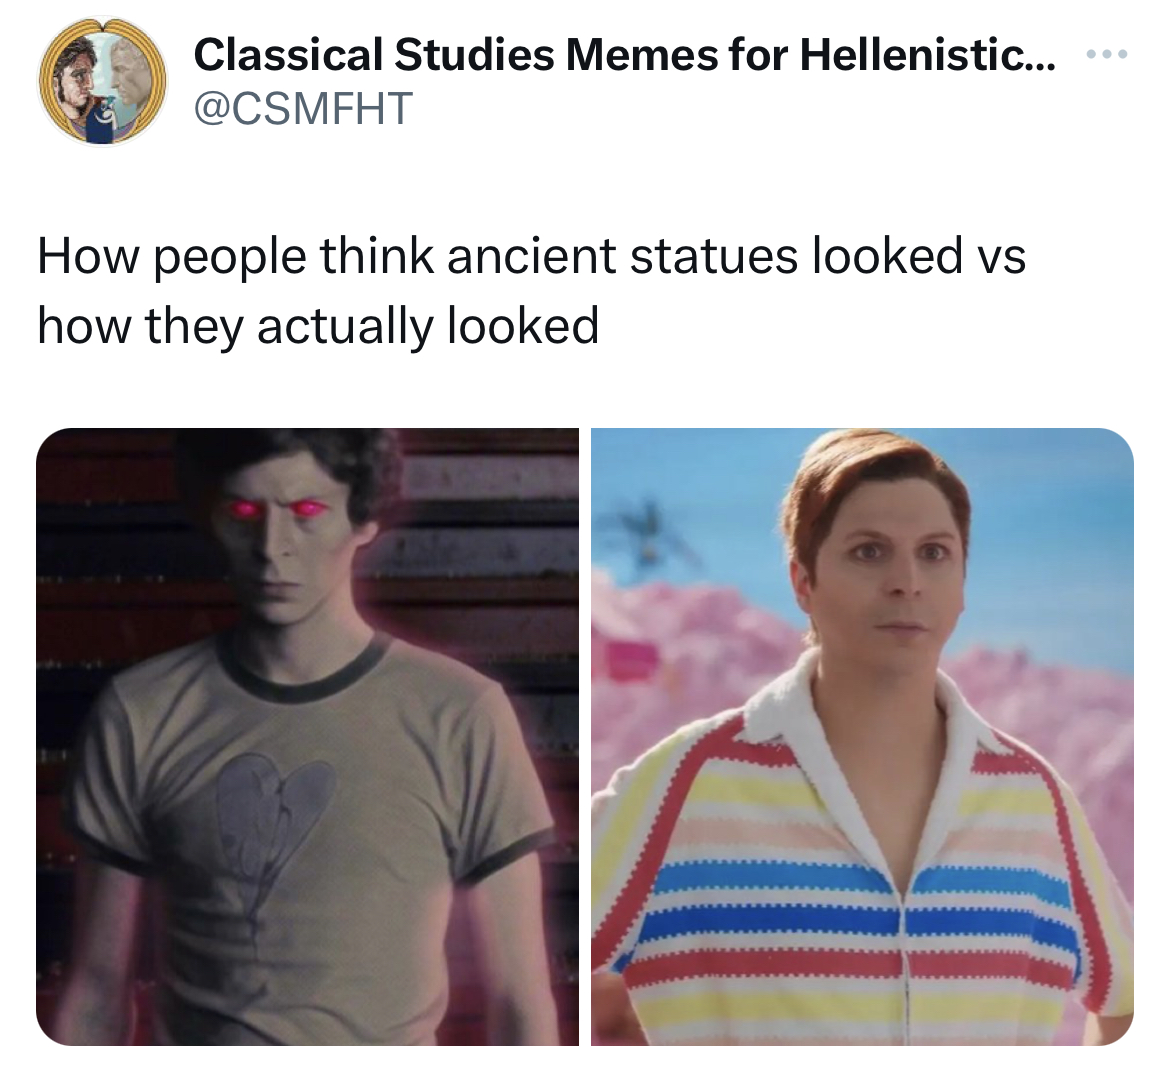 savage tweets shoulder - Classical Studies Memes for Hellenistic... How people think ancient statues looked vs how they actually looked